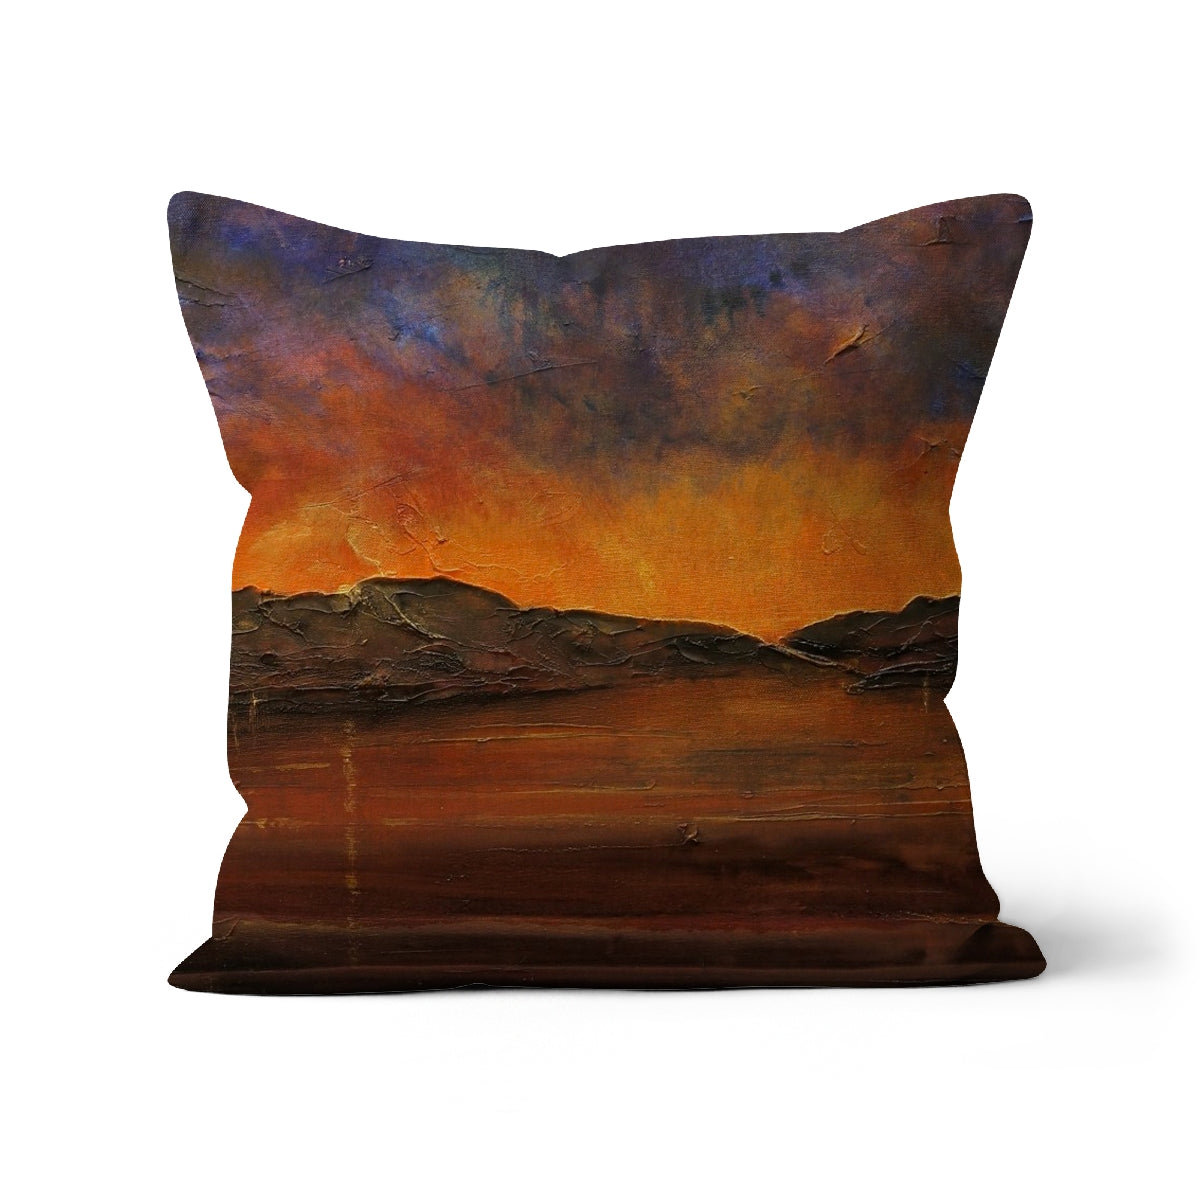 A Brooding Clyde Dusk Art Gifts Cushion-Cushions-River Clyde Art Gallery-Faux Suede-16"x16"-Paintings, Prints, Homeware, Art Gifts From Scotland By Scottish Artist Kevin Hunter